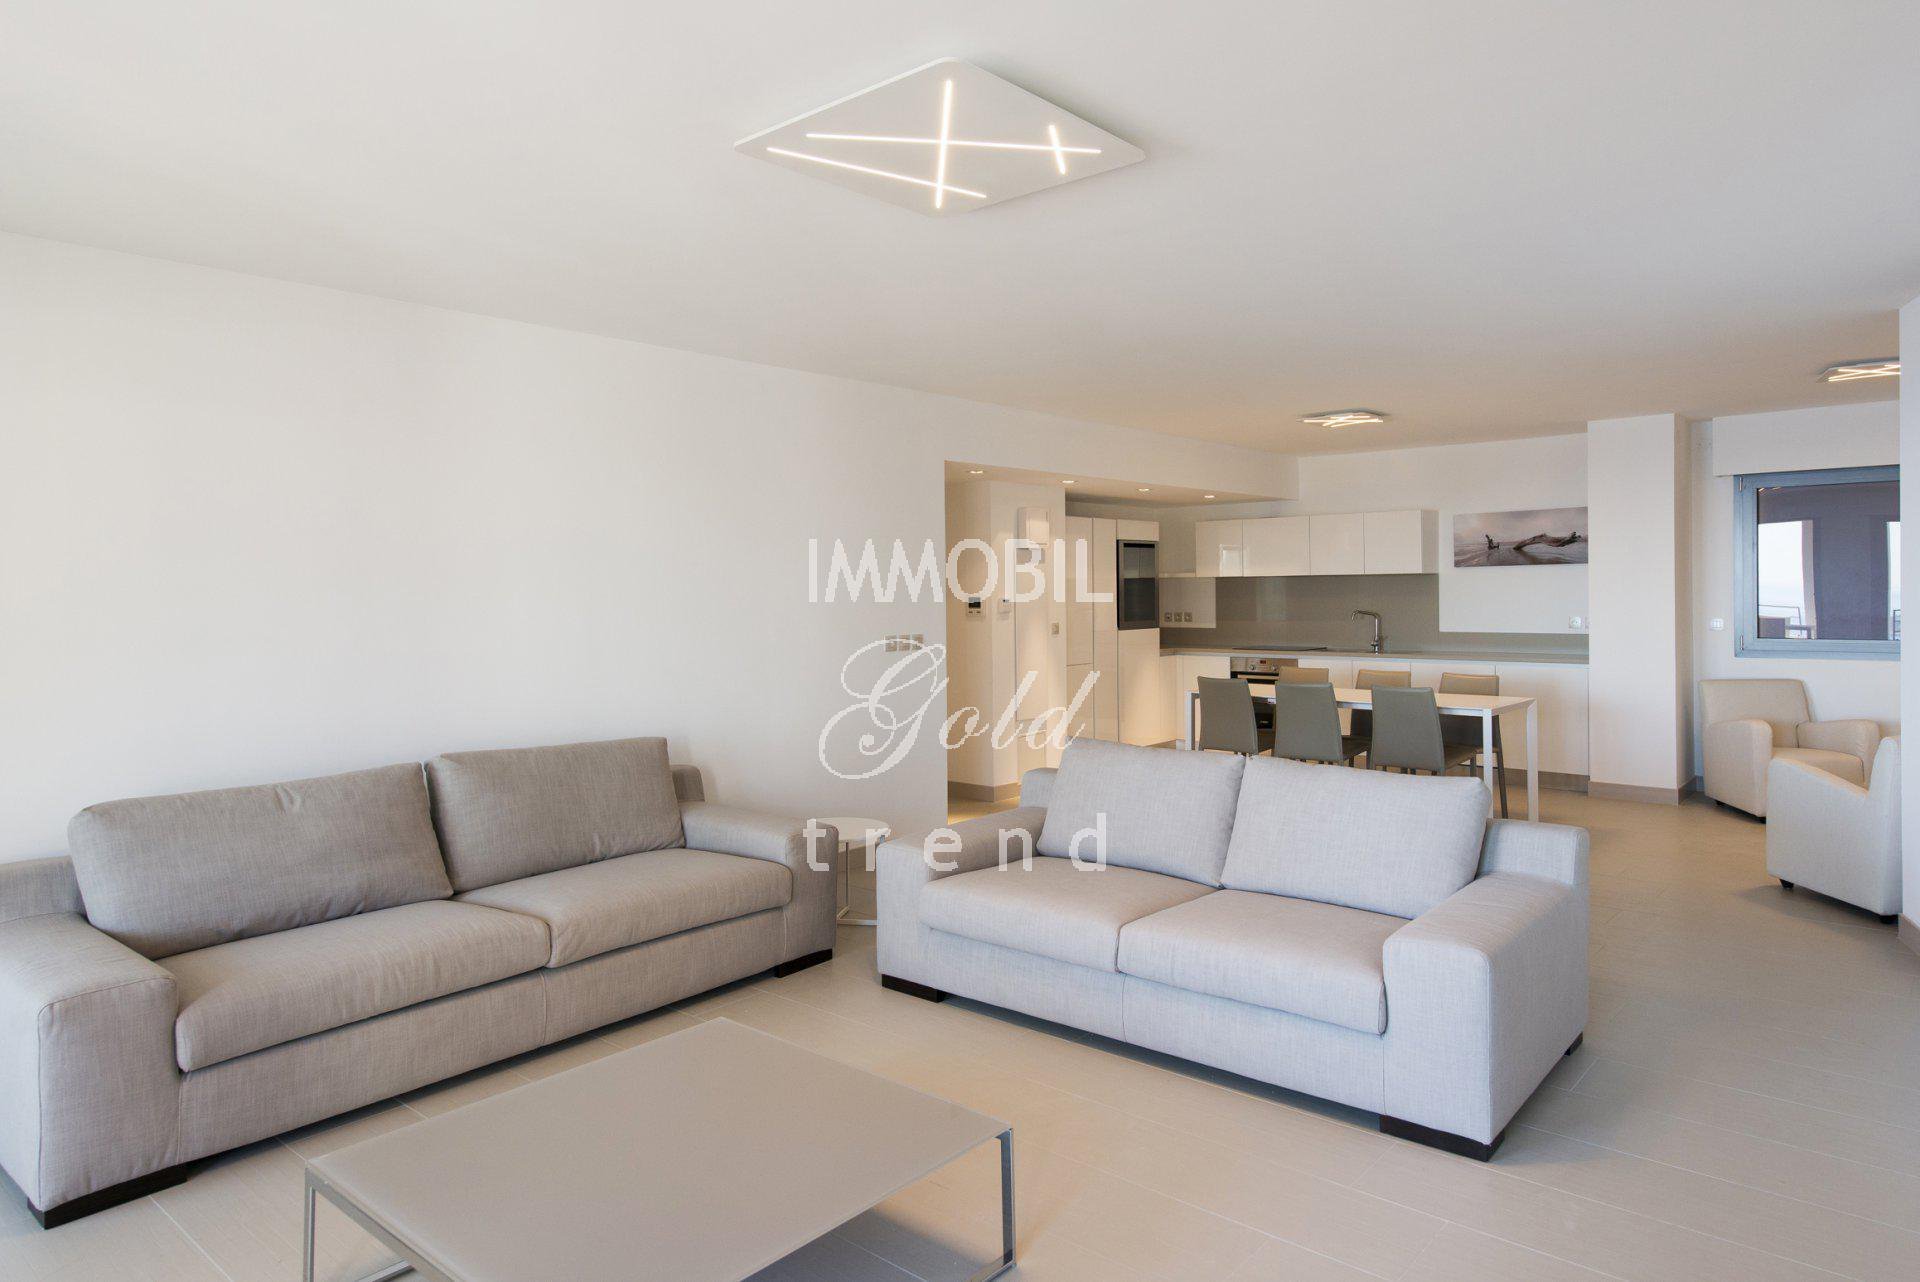 Real estate Beausoleil - For rental two bedroom apartment close to Monaco, with two terraces, sea view and a parking space